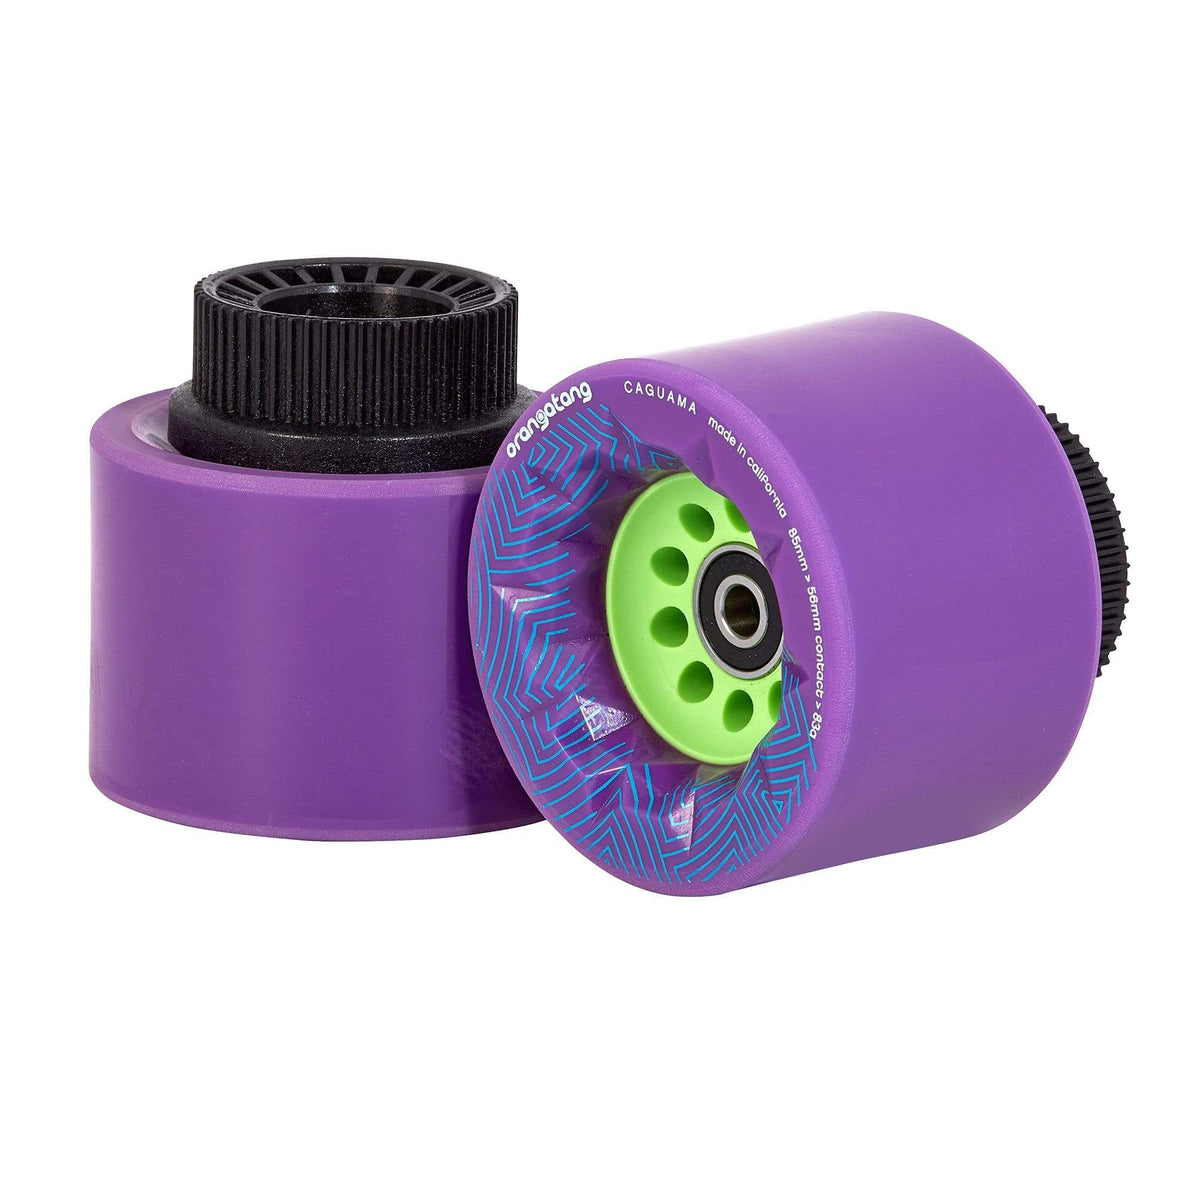 Boosted Loaded Caguama 85mm 83a, W / Pulleys - Purple